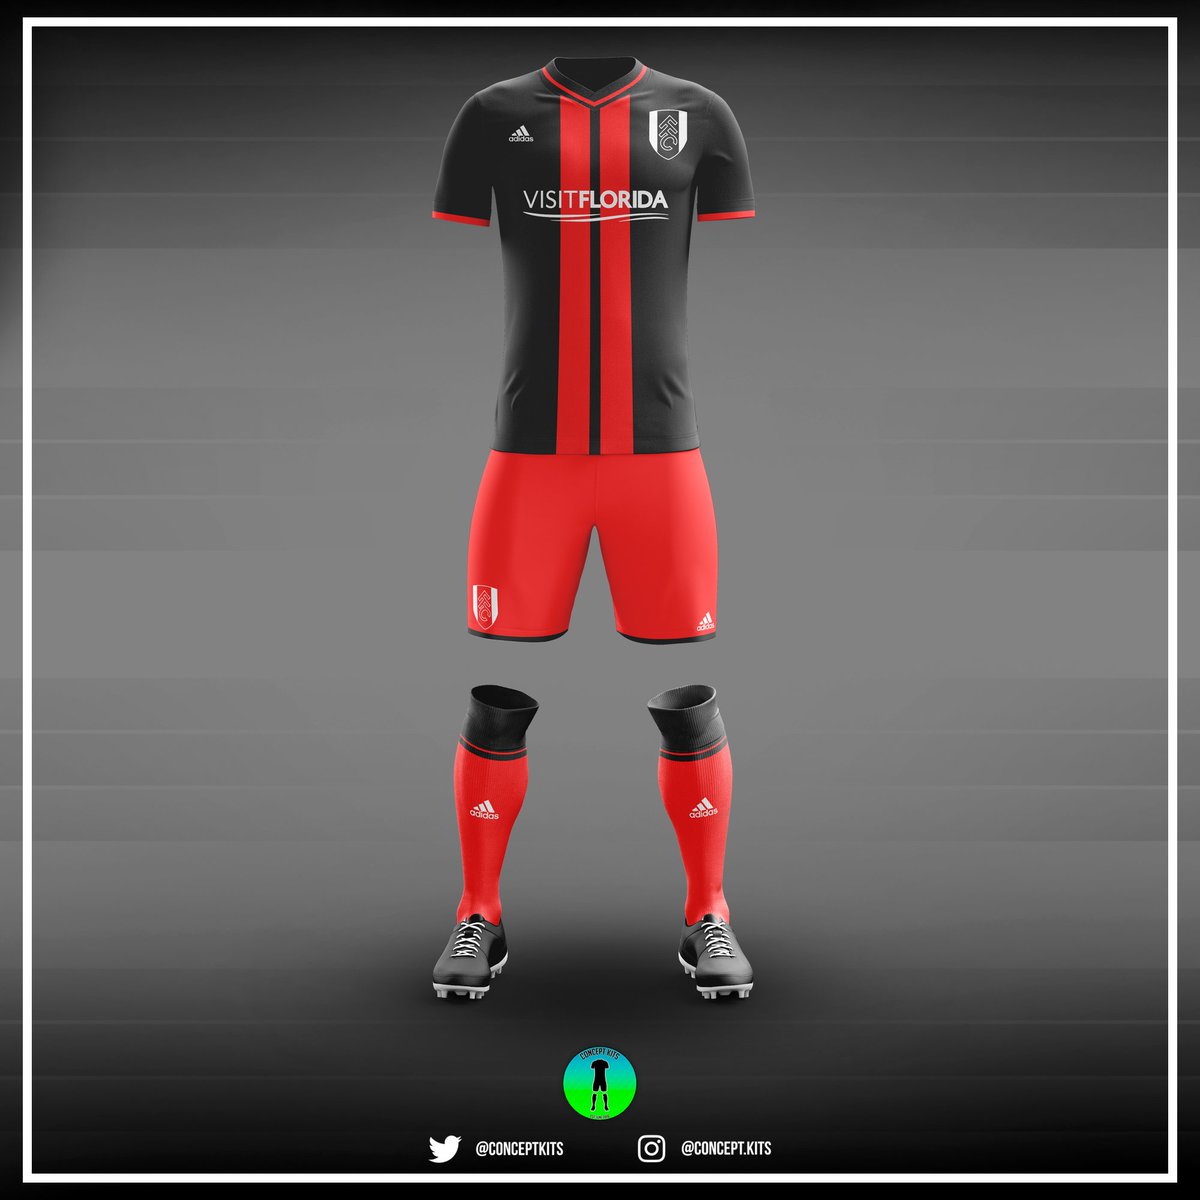 Fulham Football Club away kit concept 2017/18 #FFC #Fulham #FulhamFC #FulhamFootballClub #EFL #CravenCottage #Cairney #thecottage #Sessegnon